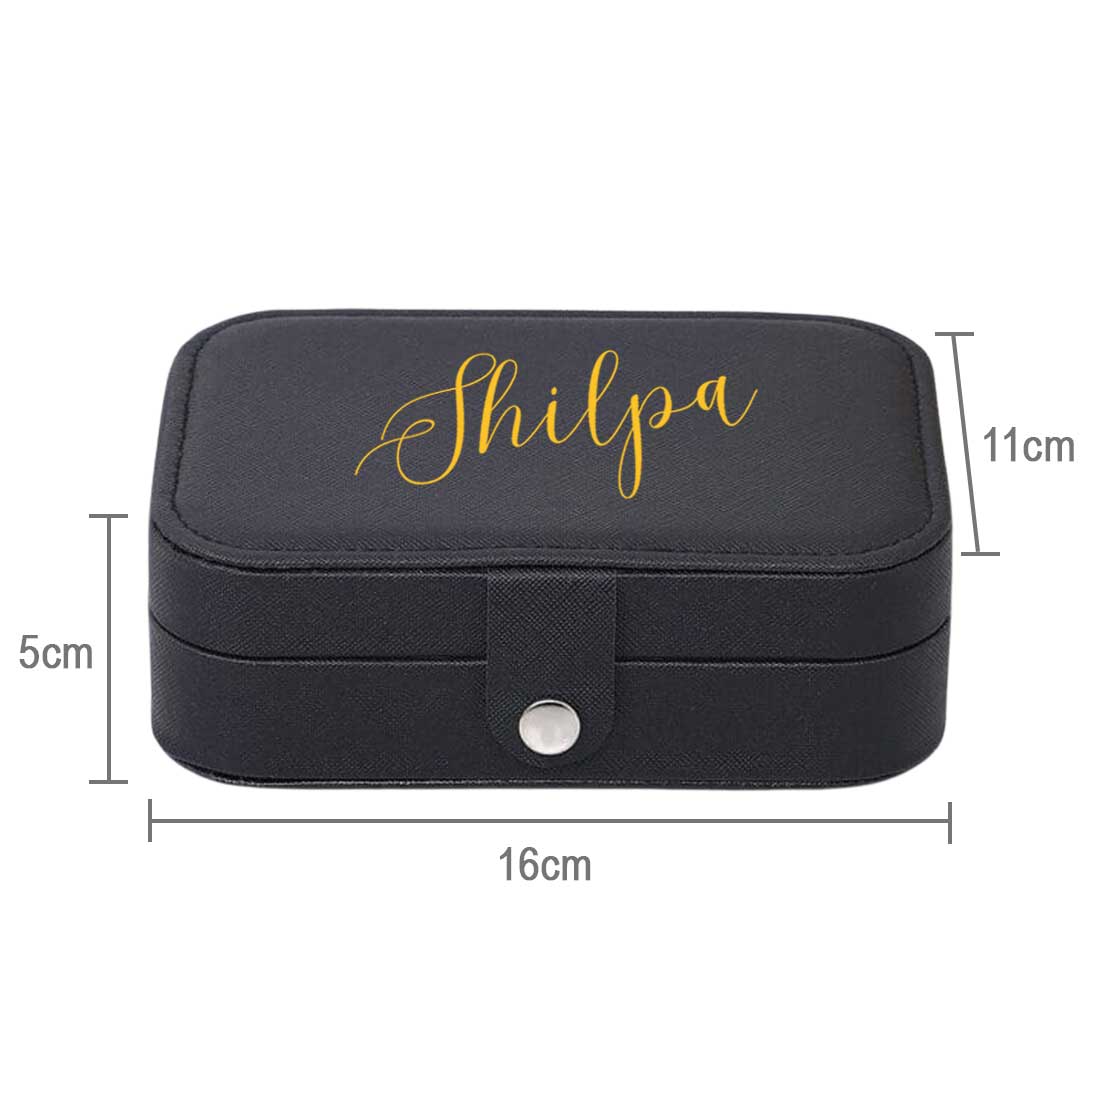 Personalized Jewellery Box Organizer For Travel jewelry Case for Earrings Pendant Rings Necklaces - Add Name